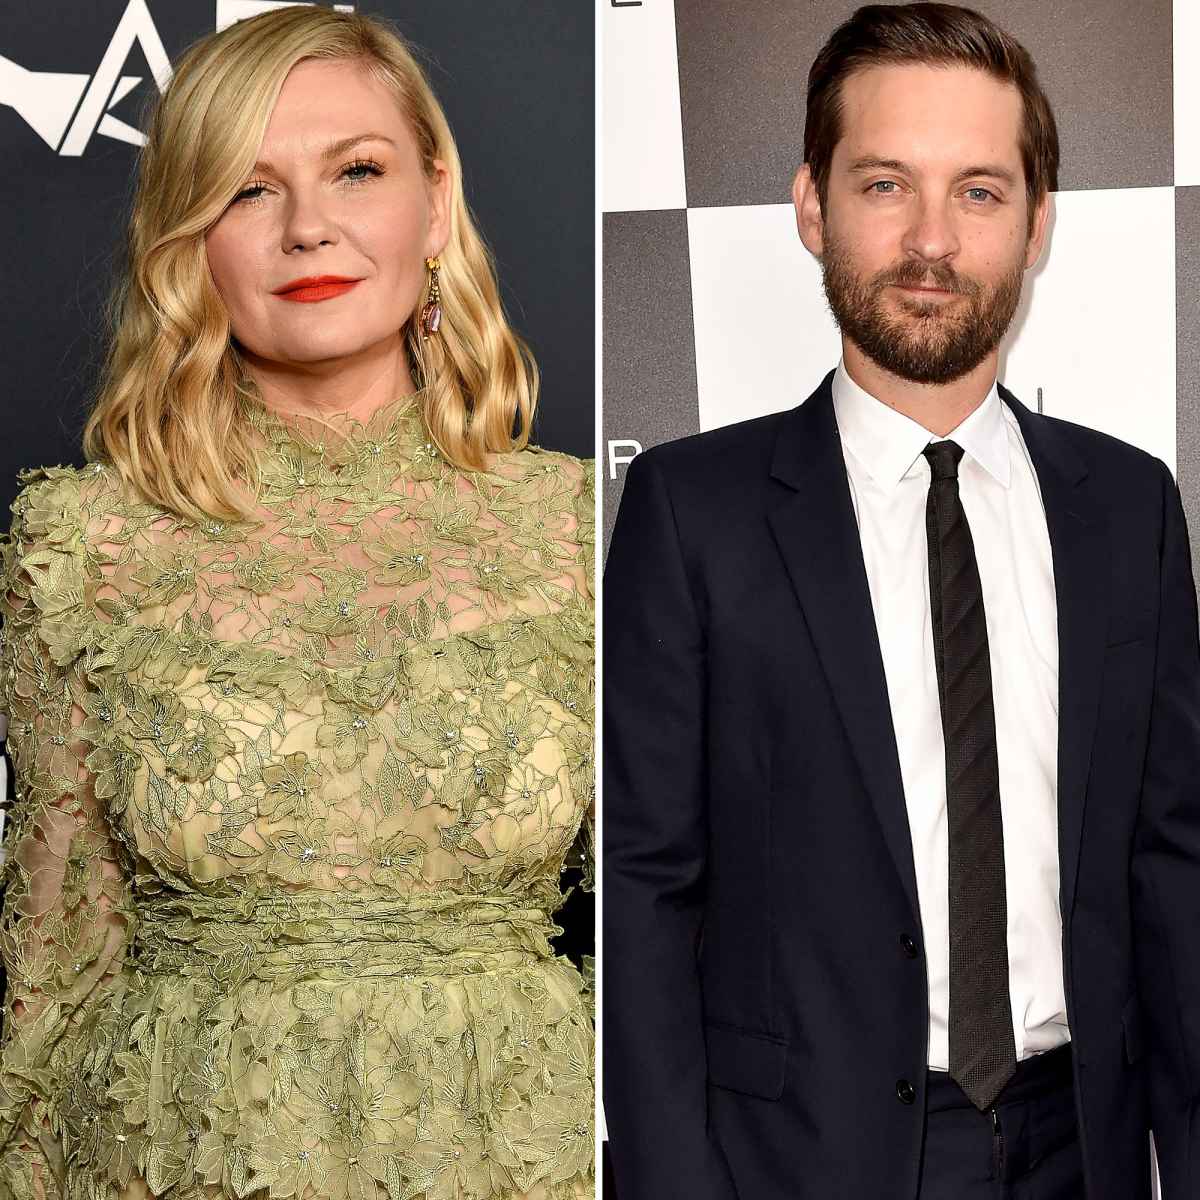 Kirsten Dunst Says Tobey Maguire Was Paid More for 'SpiderMan'